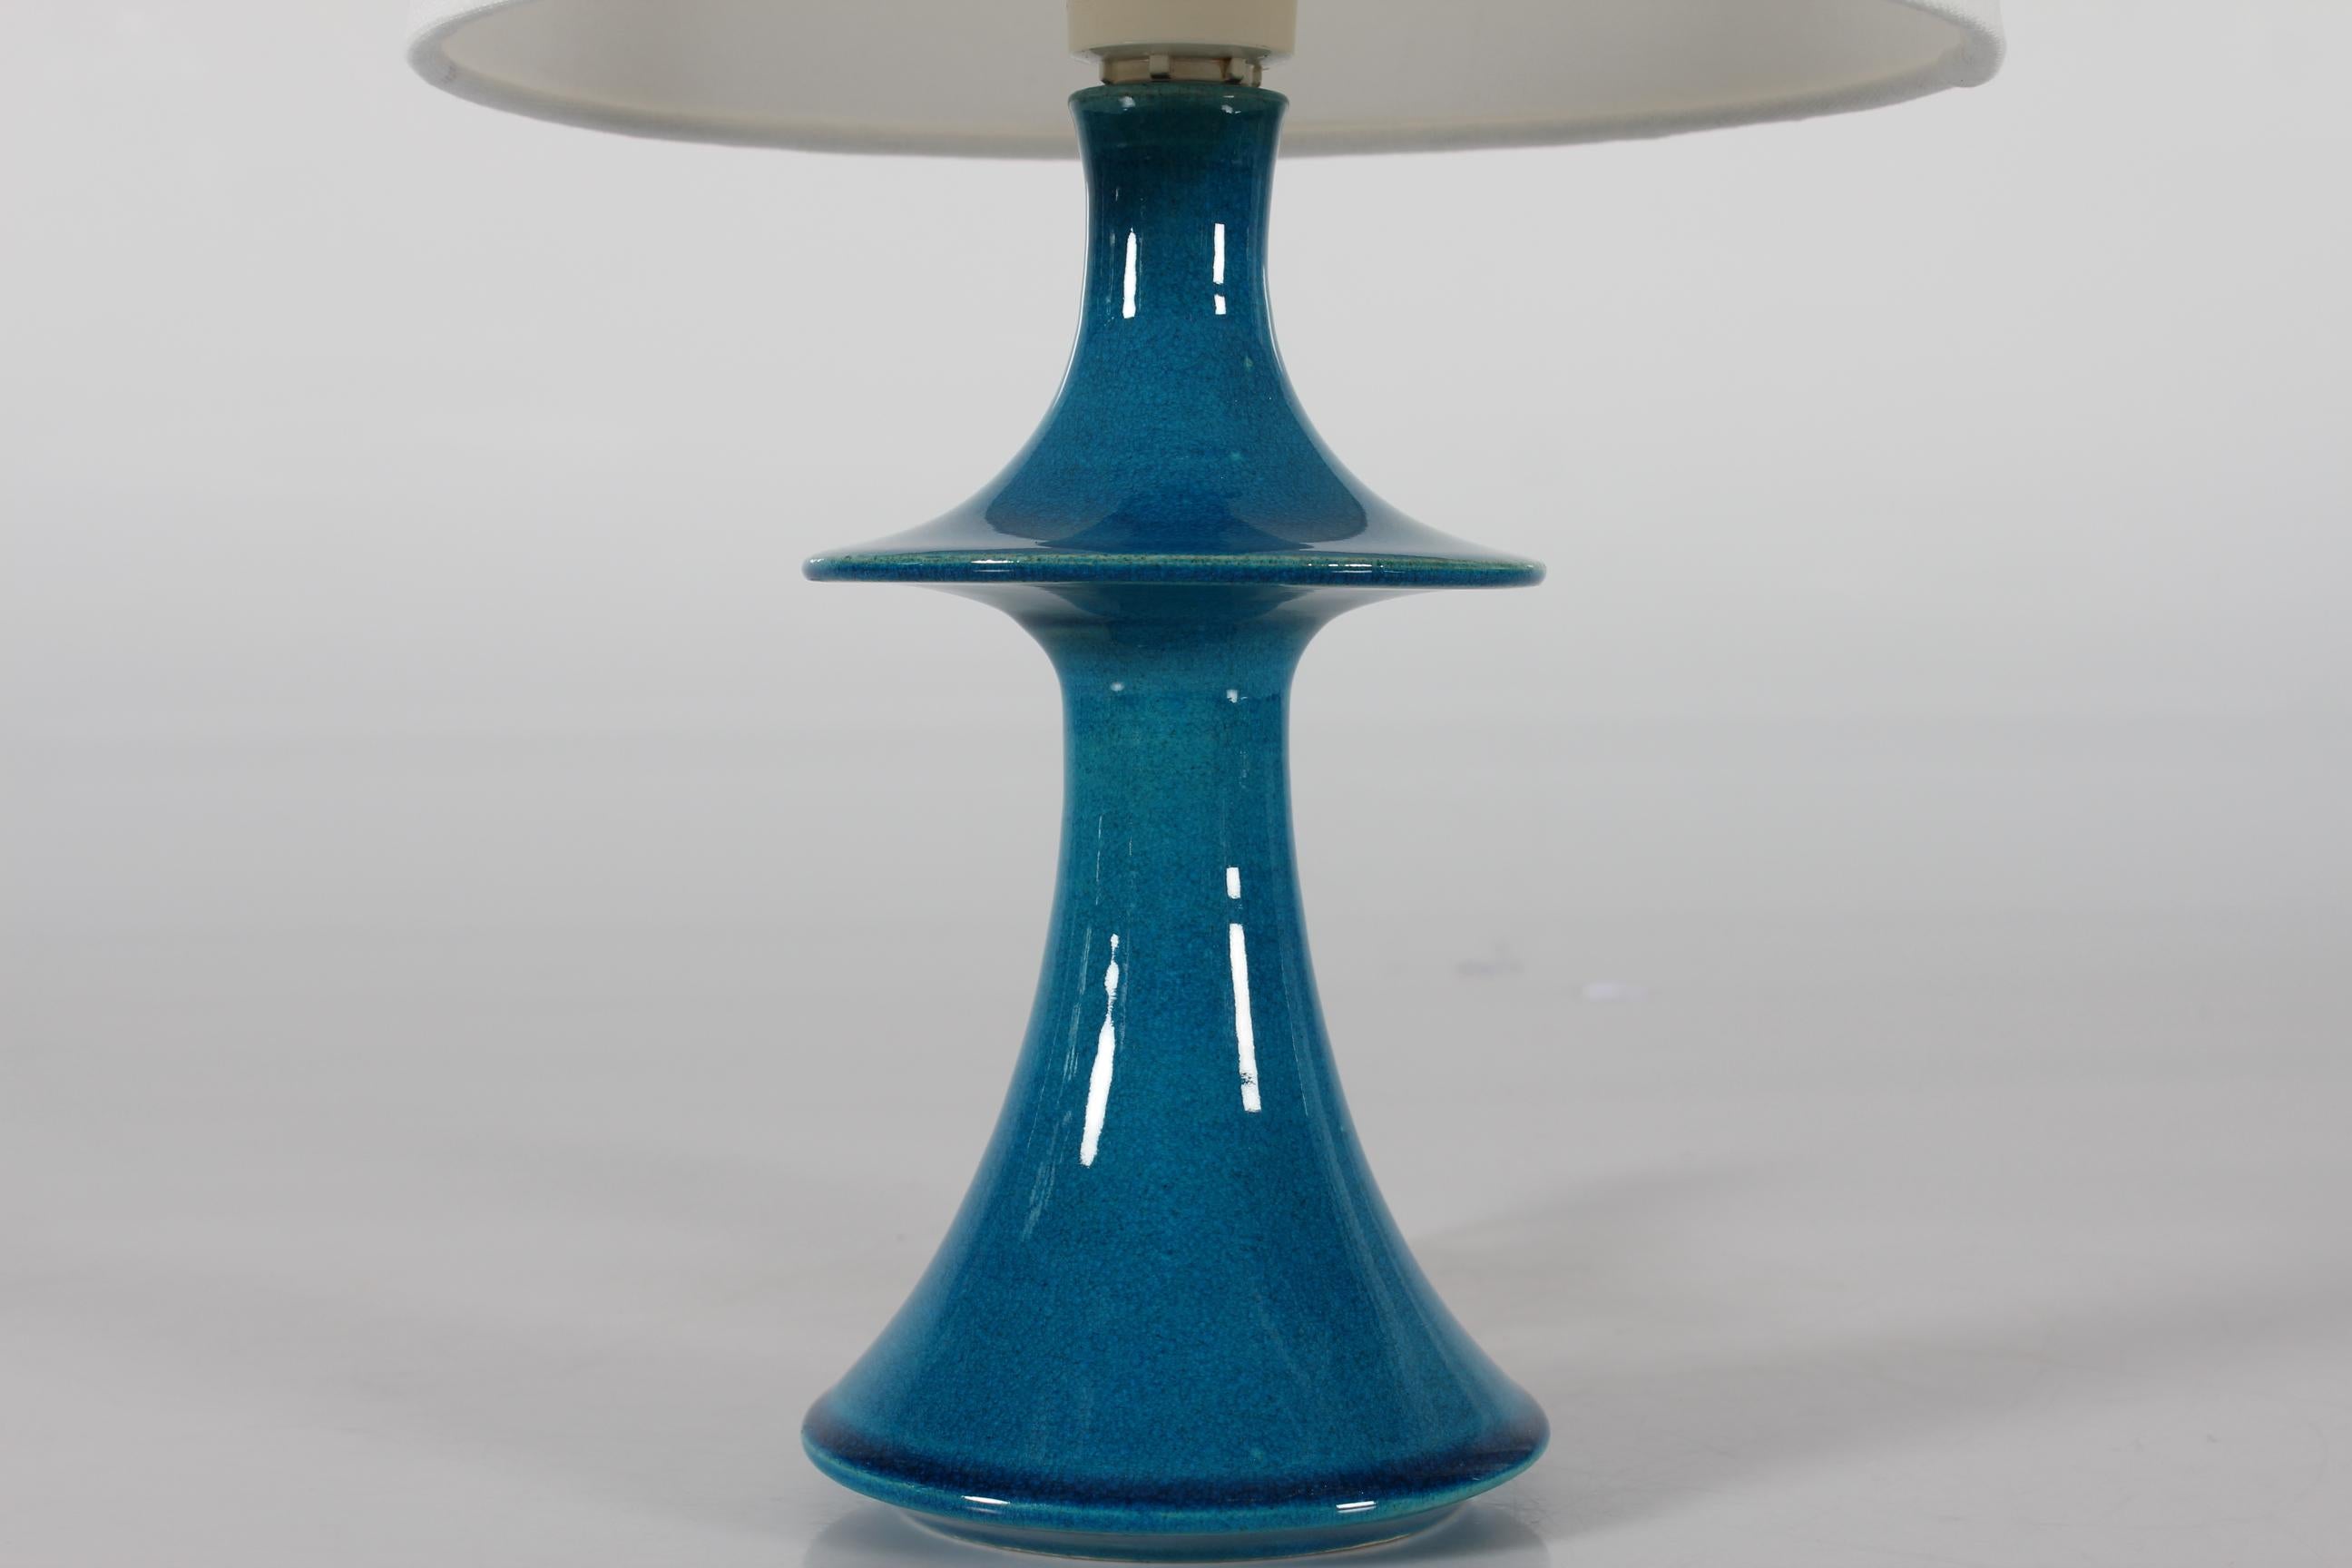 Danish table lamp with UFO shaped sculptural design by Poul Erik Eliasen made at the danish ceramic workshop H. A. Kähler (HAK).
The lamp is created in the 1970s of stoneware decorated with glossy turquoise blue glaze.

Hand signed 